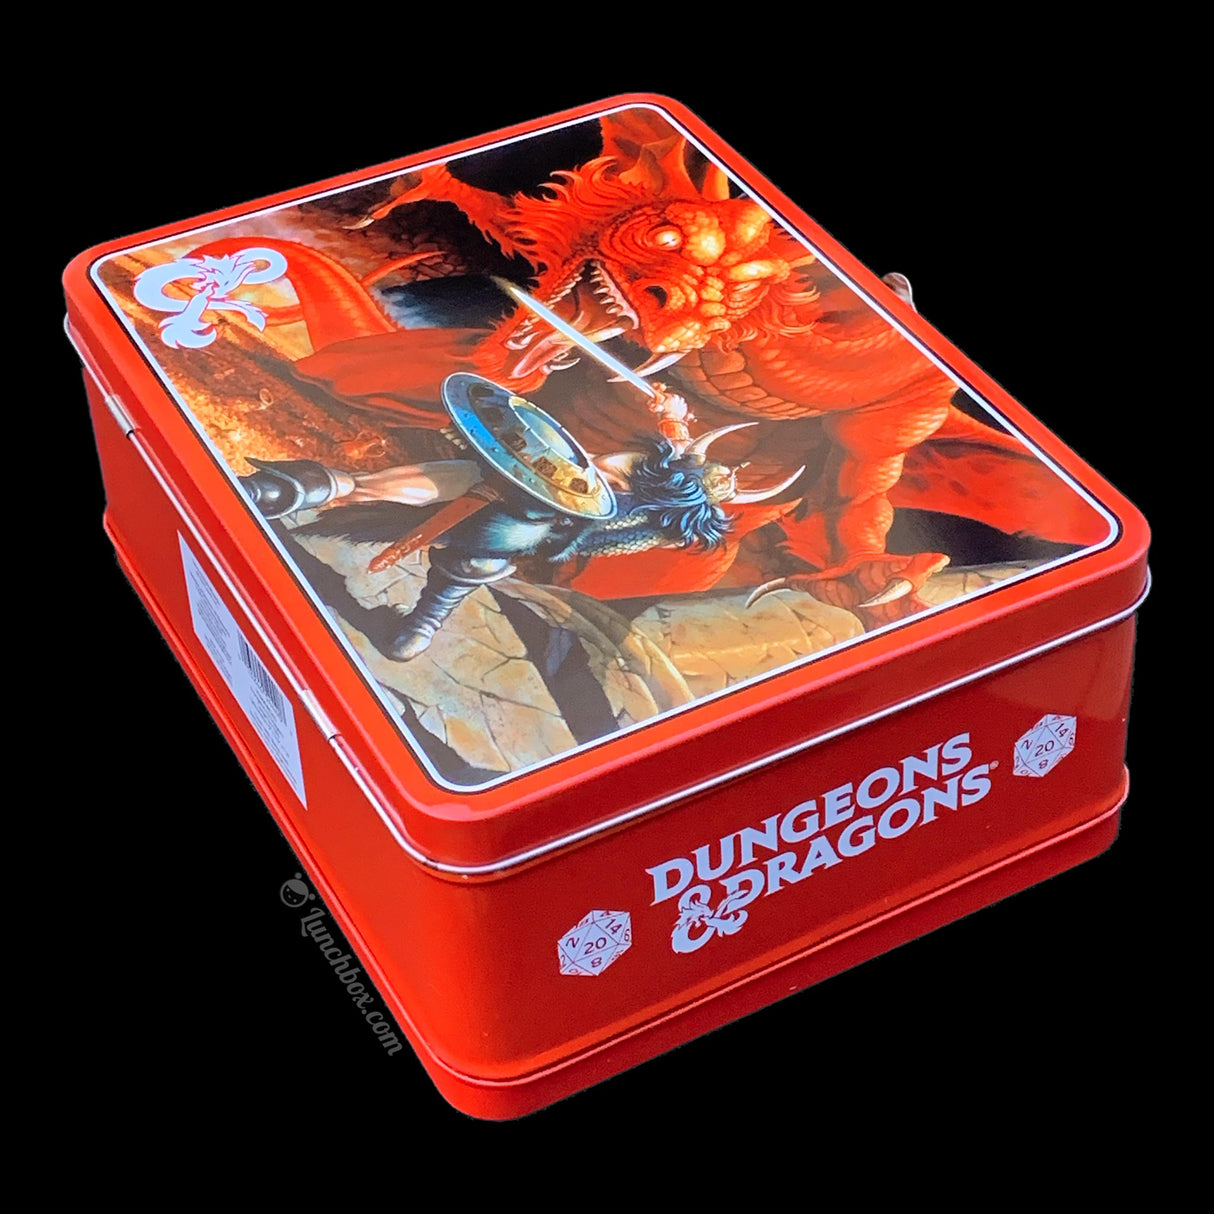 Dungeons & Dragons Metal Lunch Box